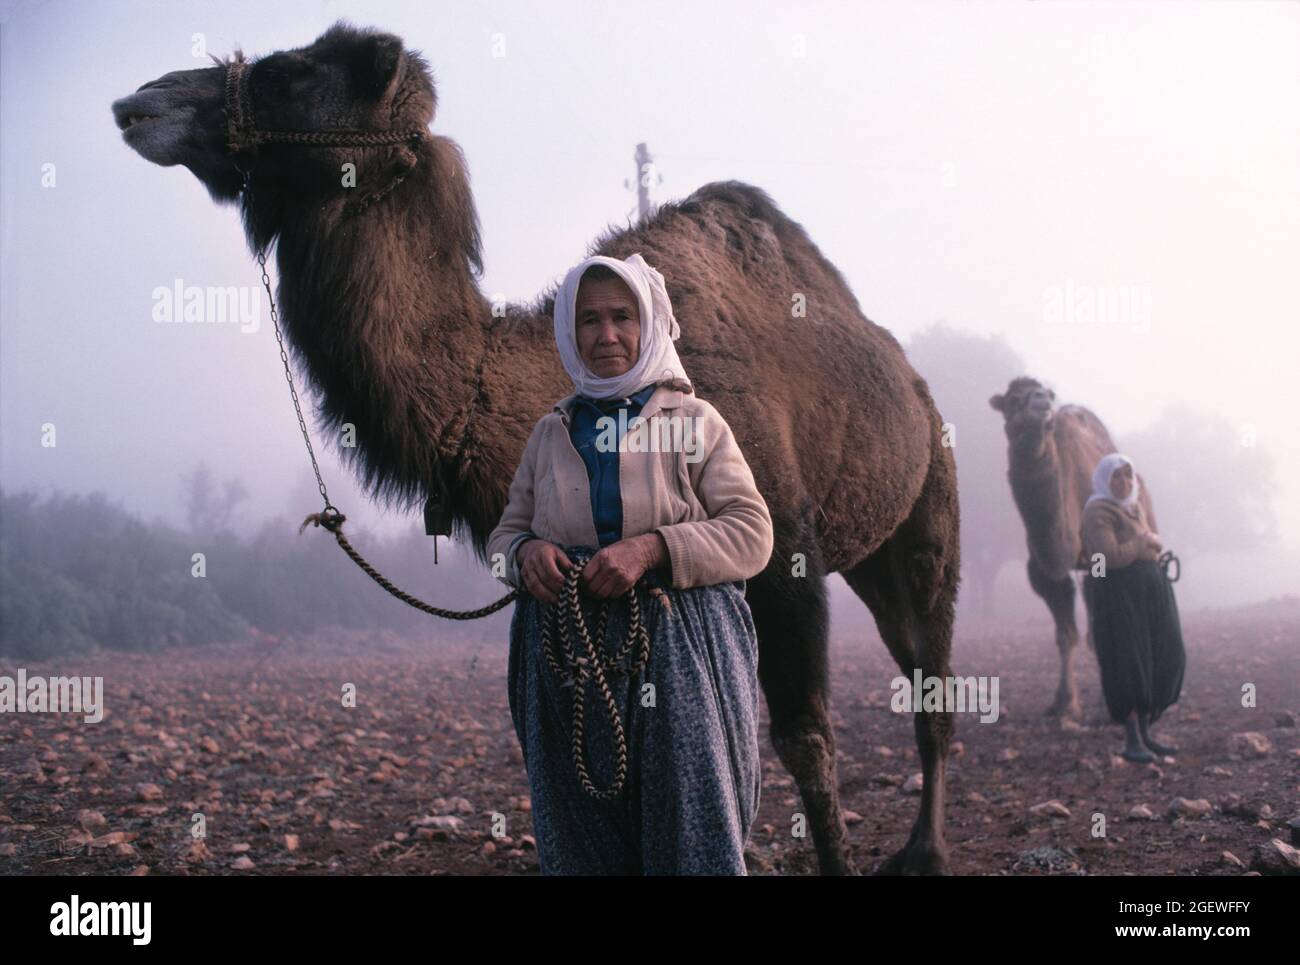 Turkey. Rural south west region. Local women with Camels. Stock Photo